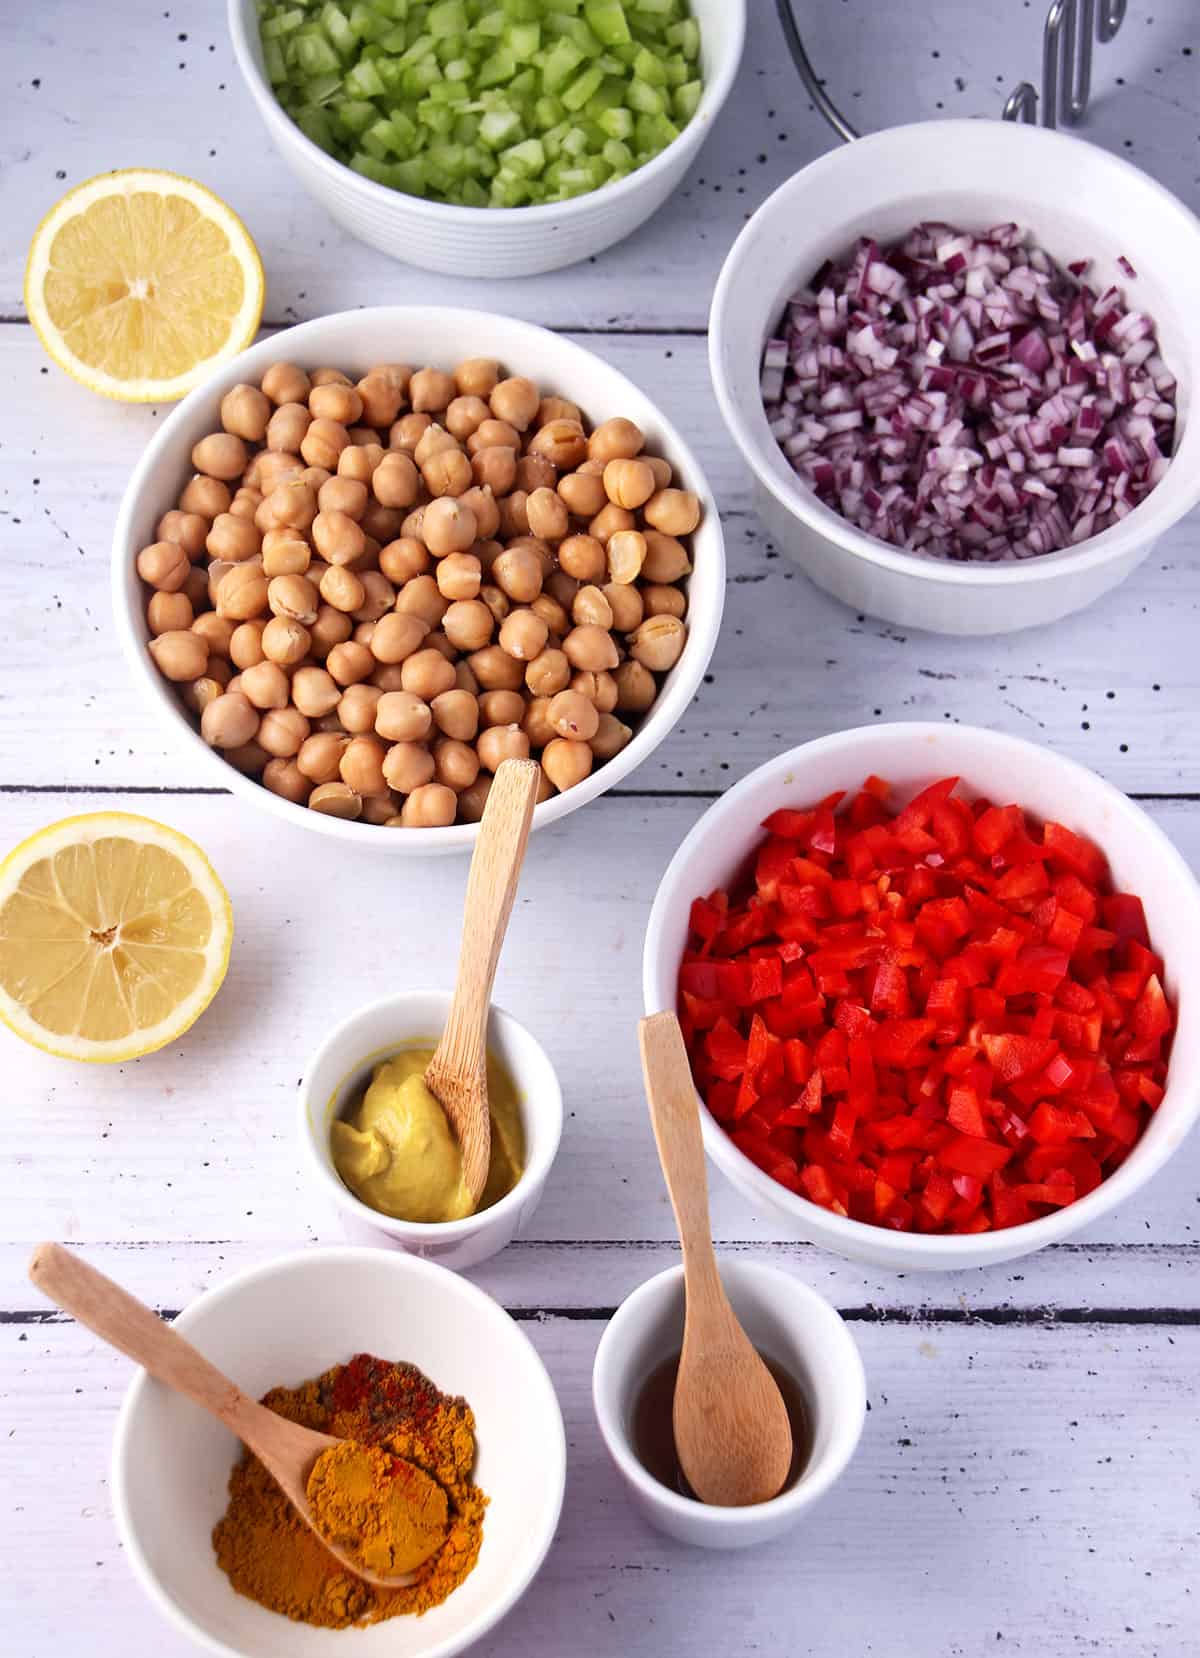 The ingredients for vegan Indian chickpea salad.